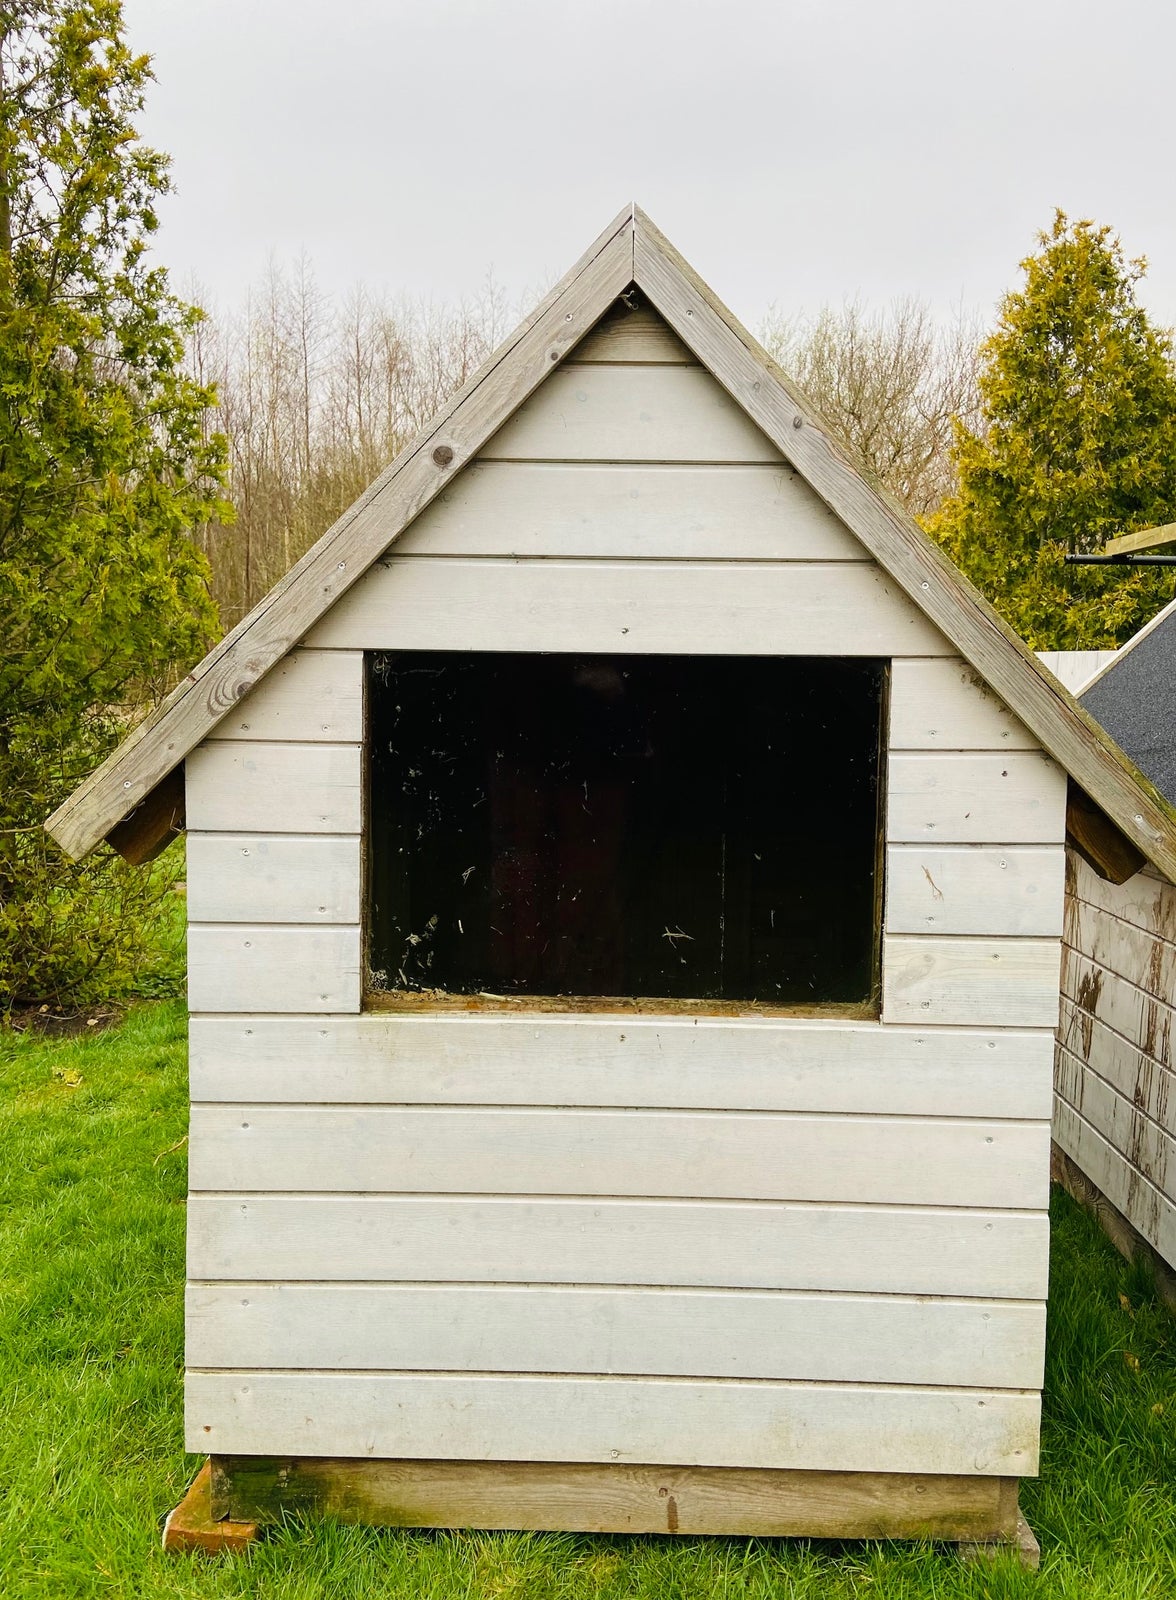 Wooden House for Hens.